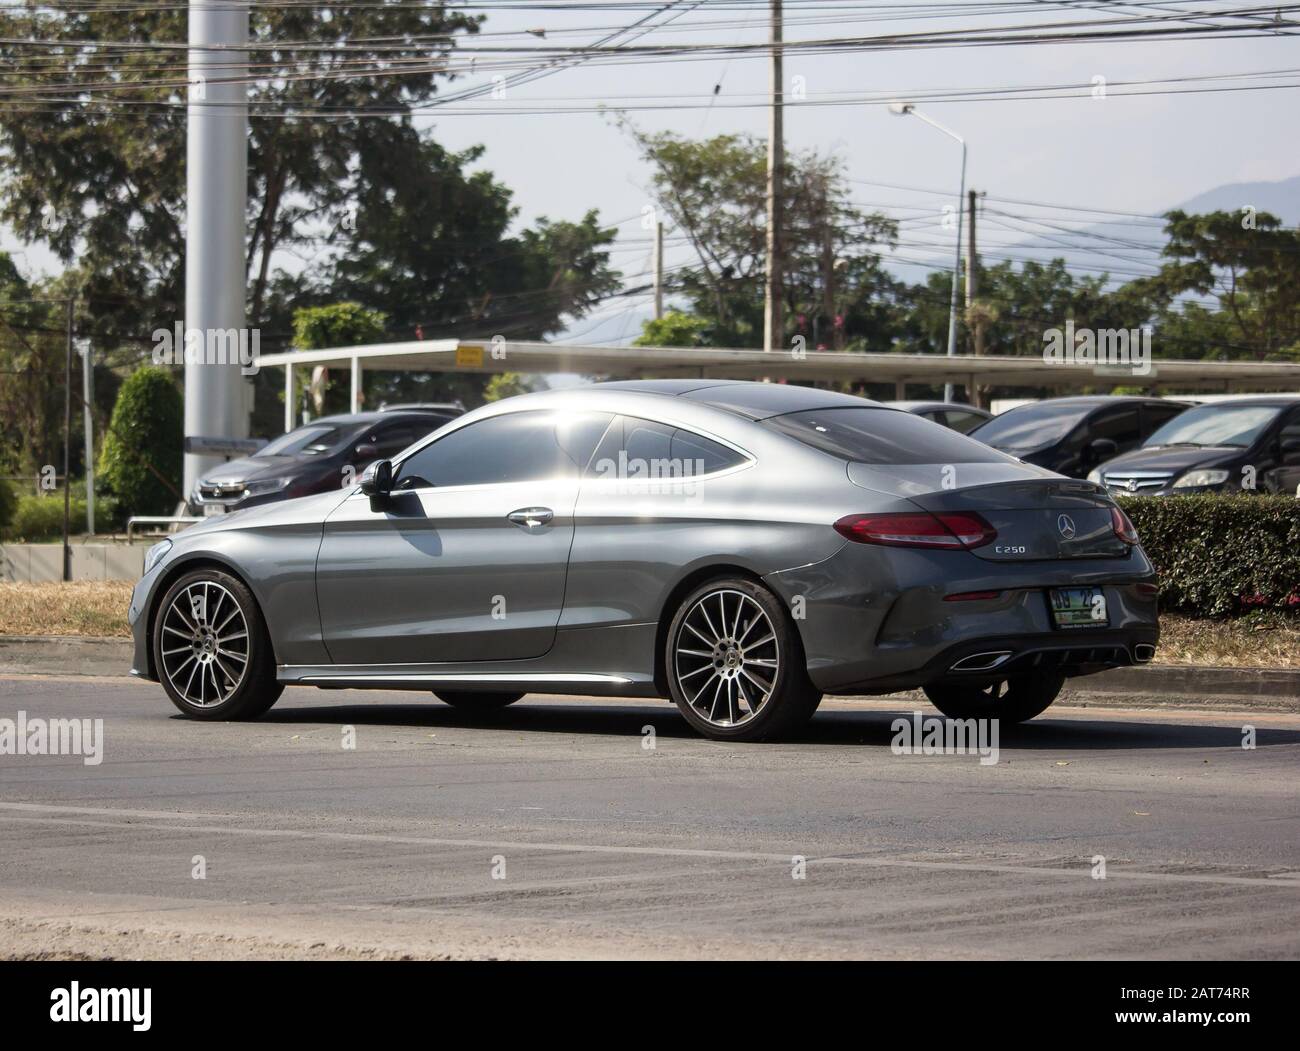 Chiangmai, Thailand - December 7 2019: luxury car  Mercedes Benz C250. Photo at radial road no.1001 north of chiangmai city. Stock Photo